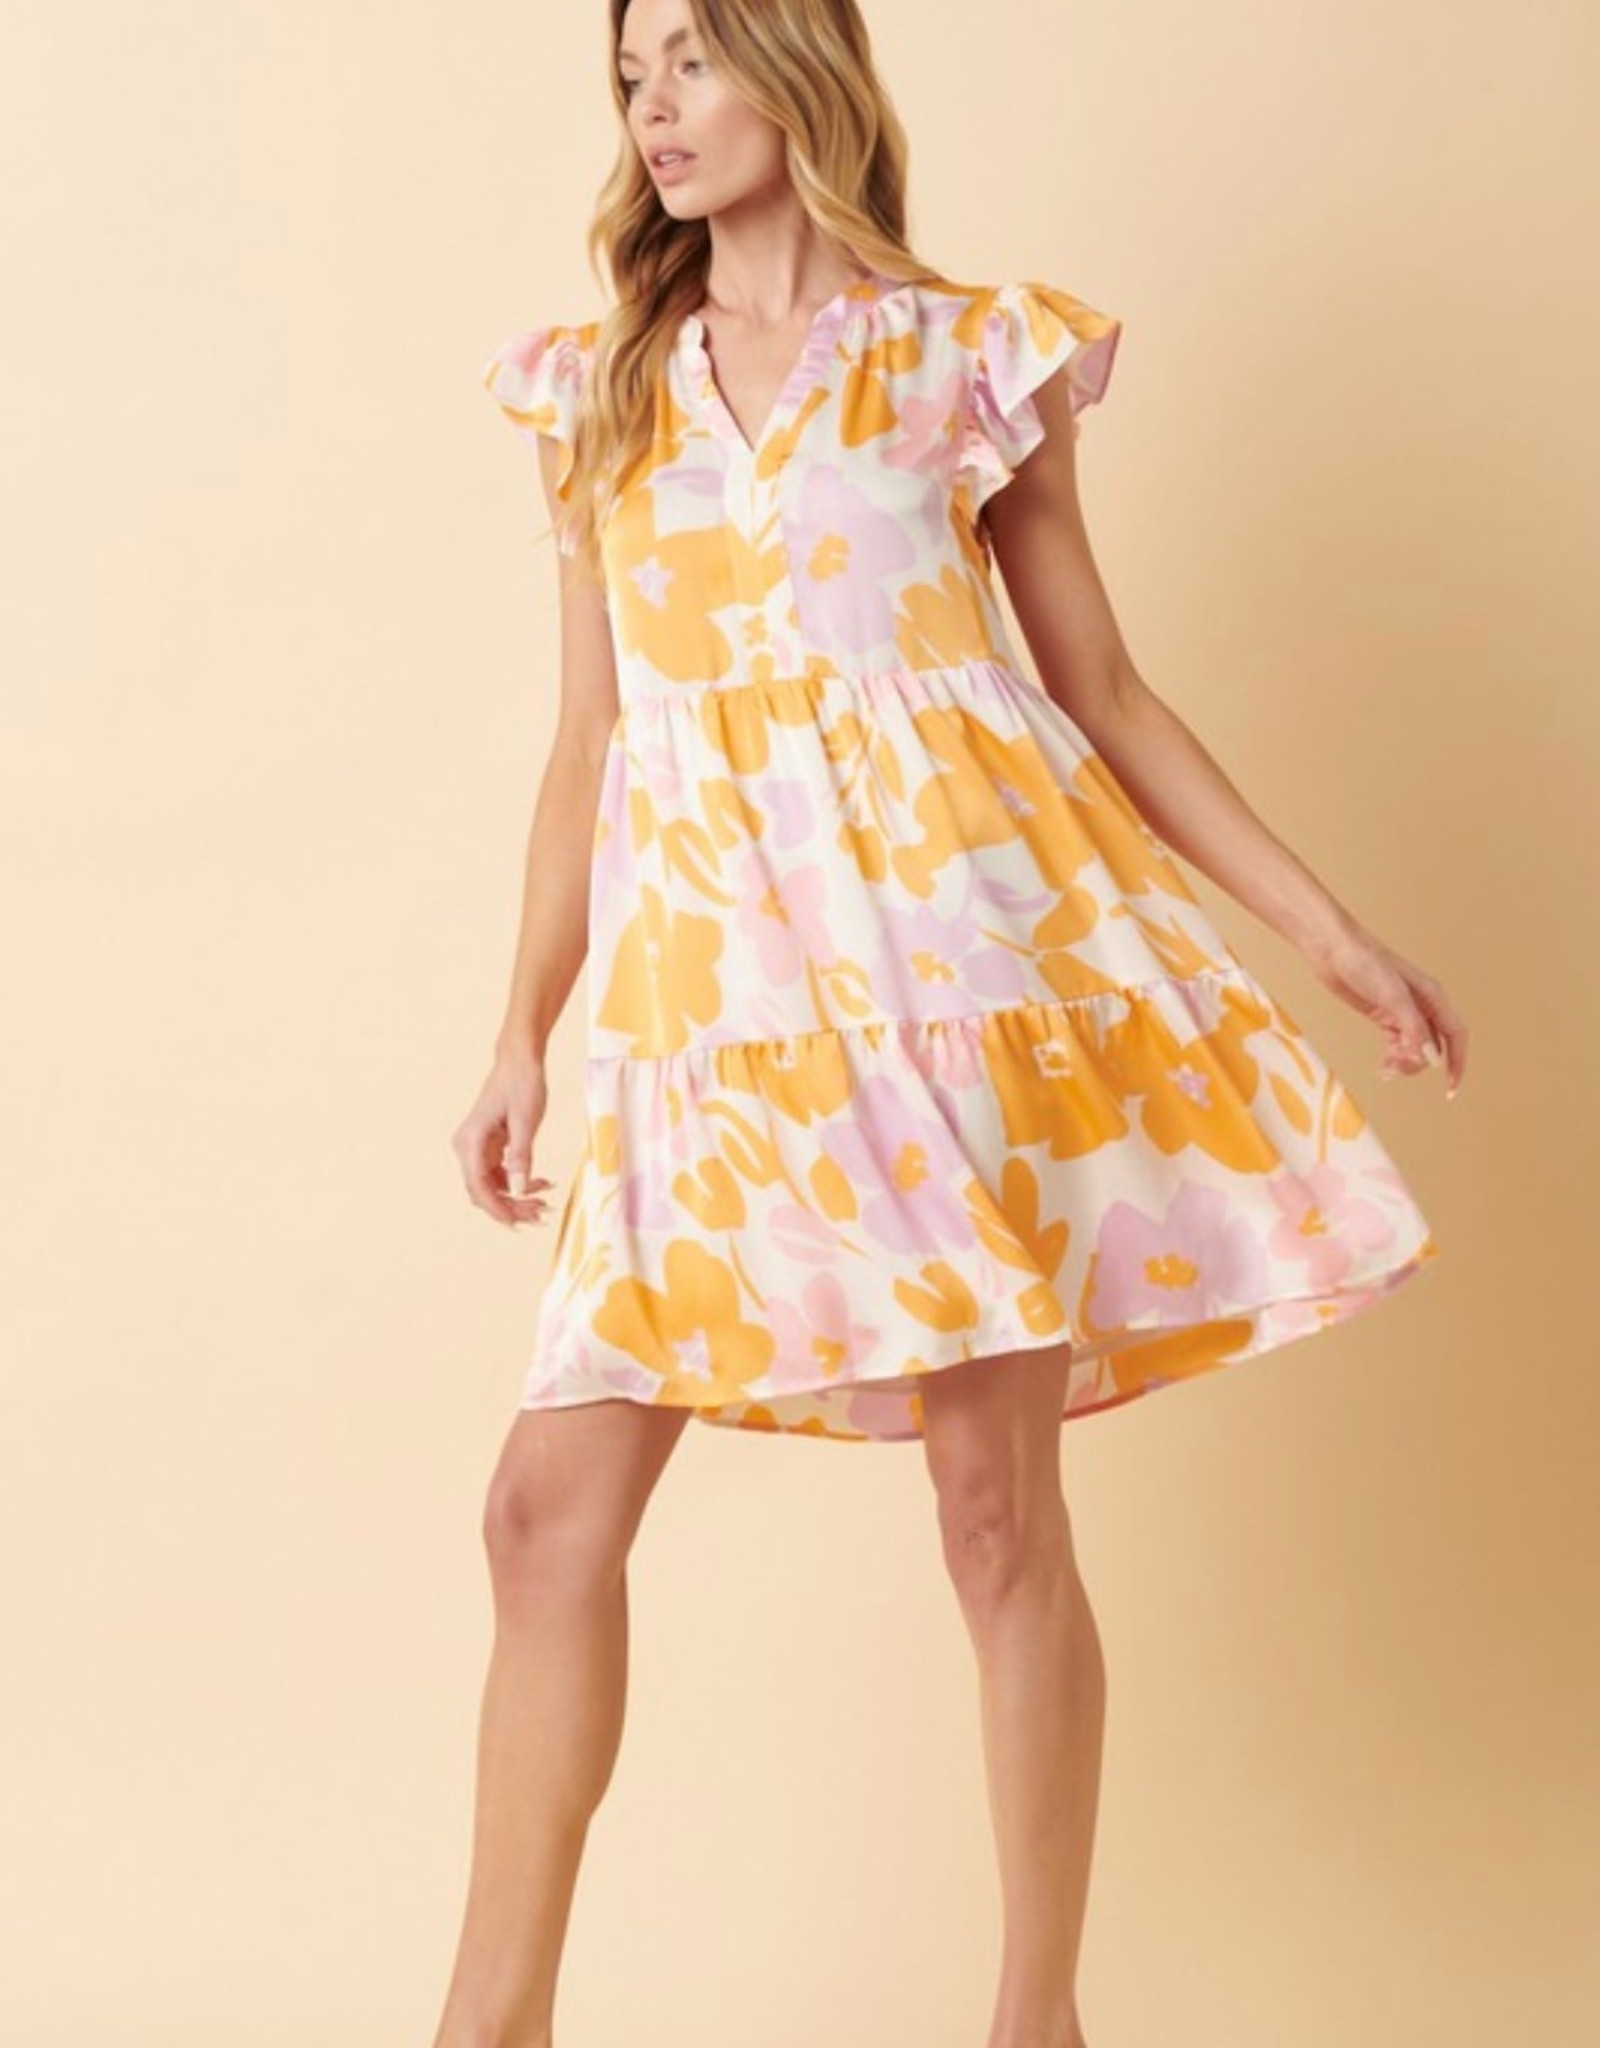 Mittoshop Piper Dress in Pink Floral